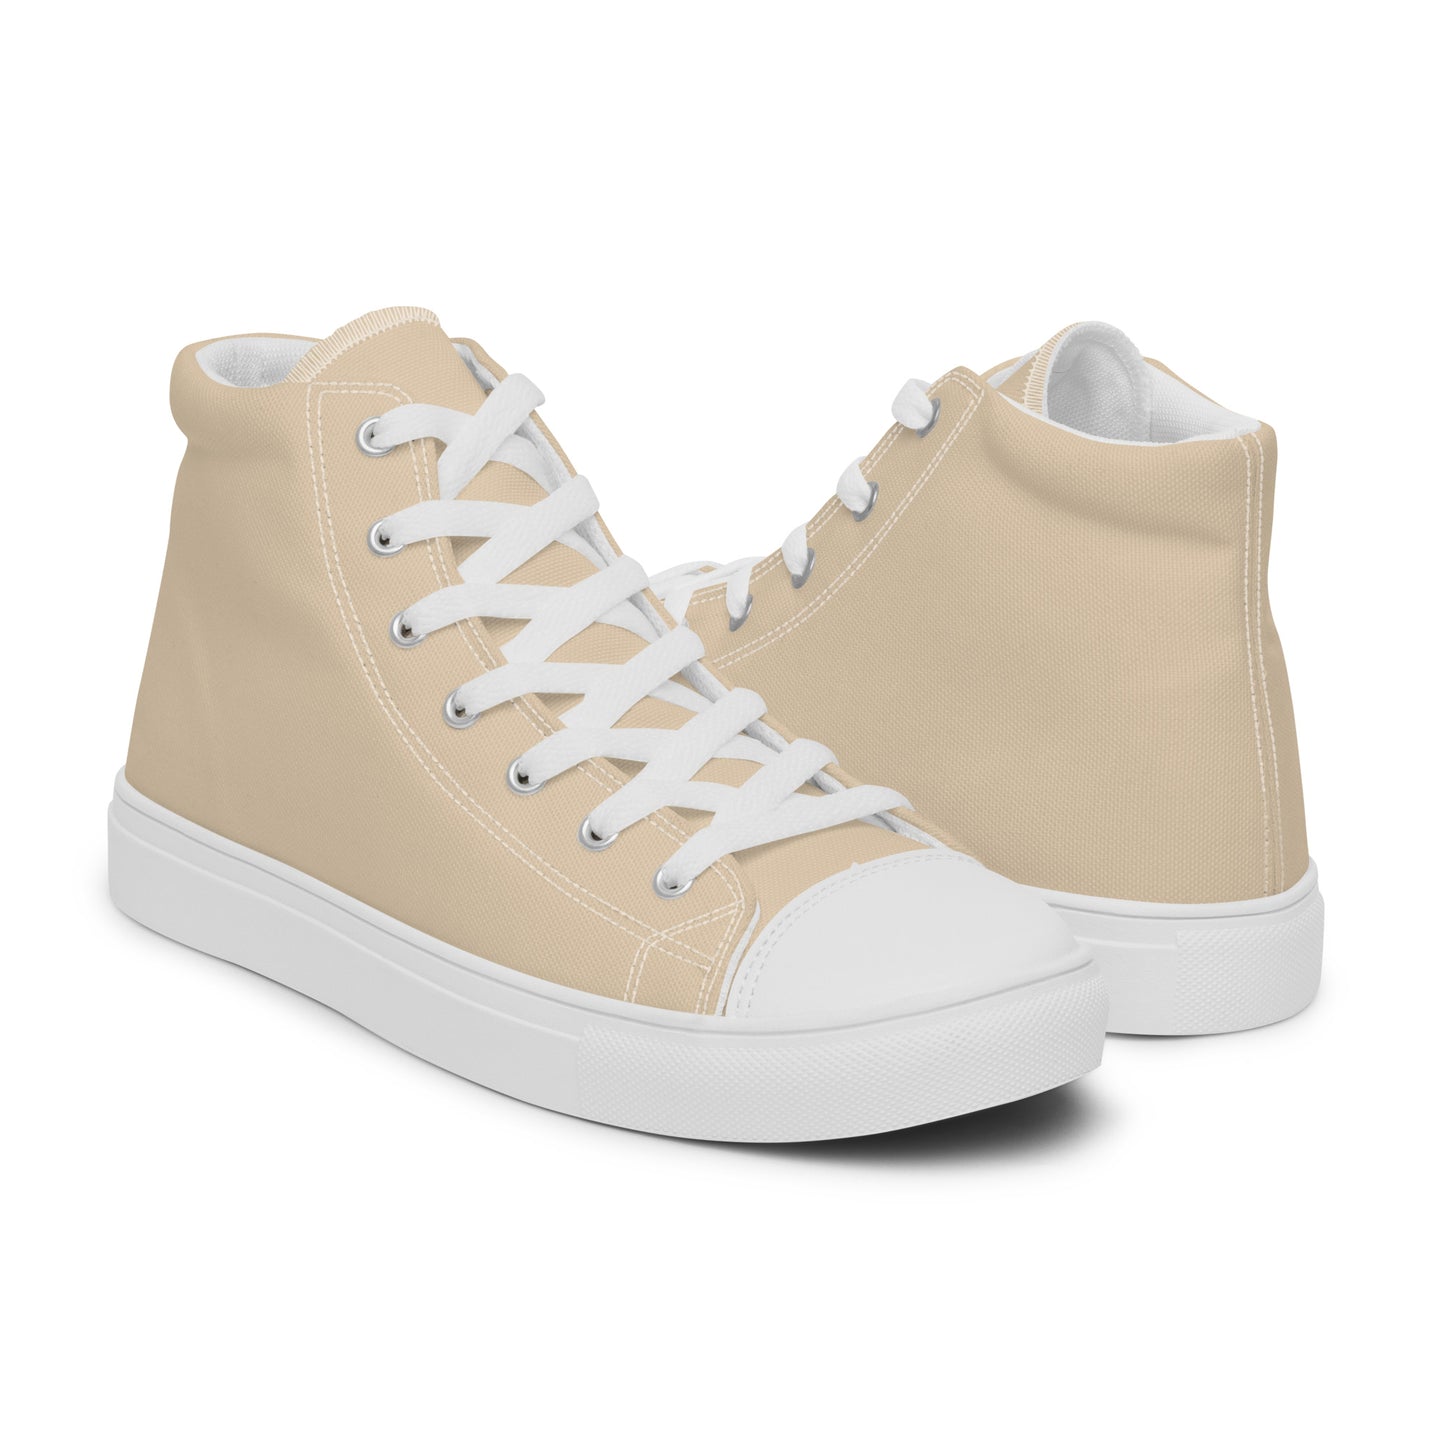 Khaki - Sustainably Made Men's High Top Canvas Shoes